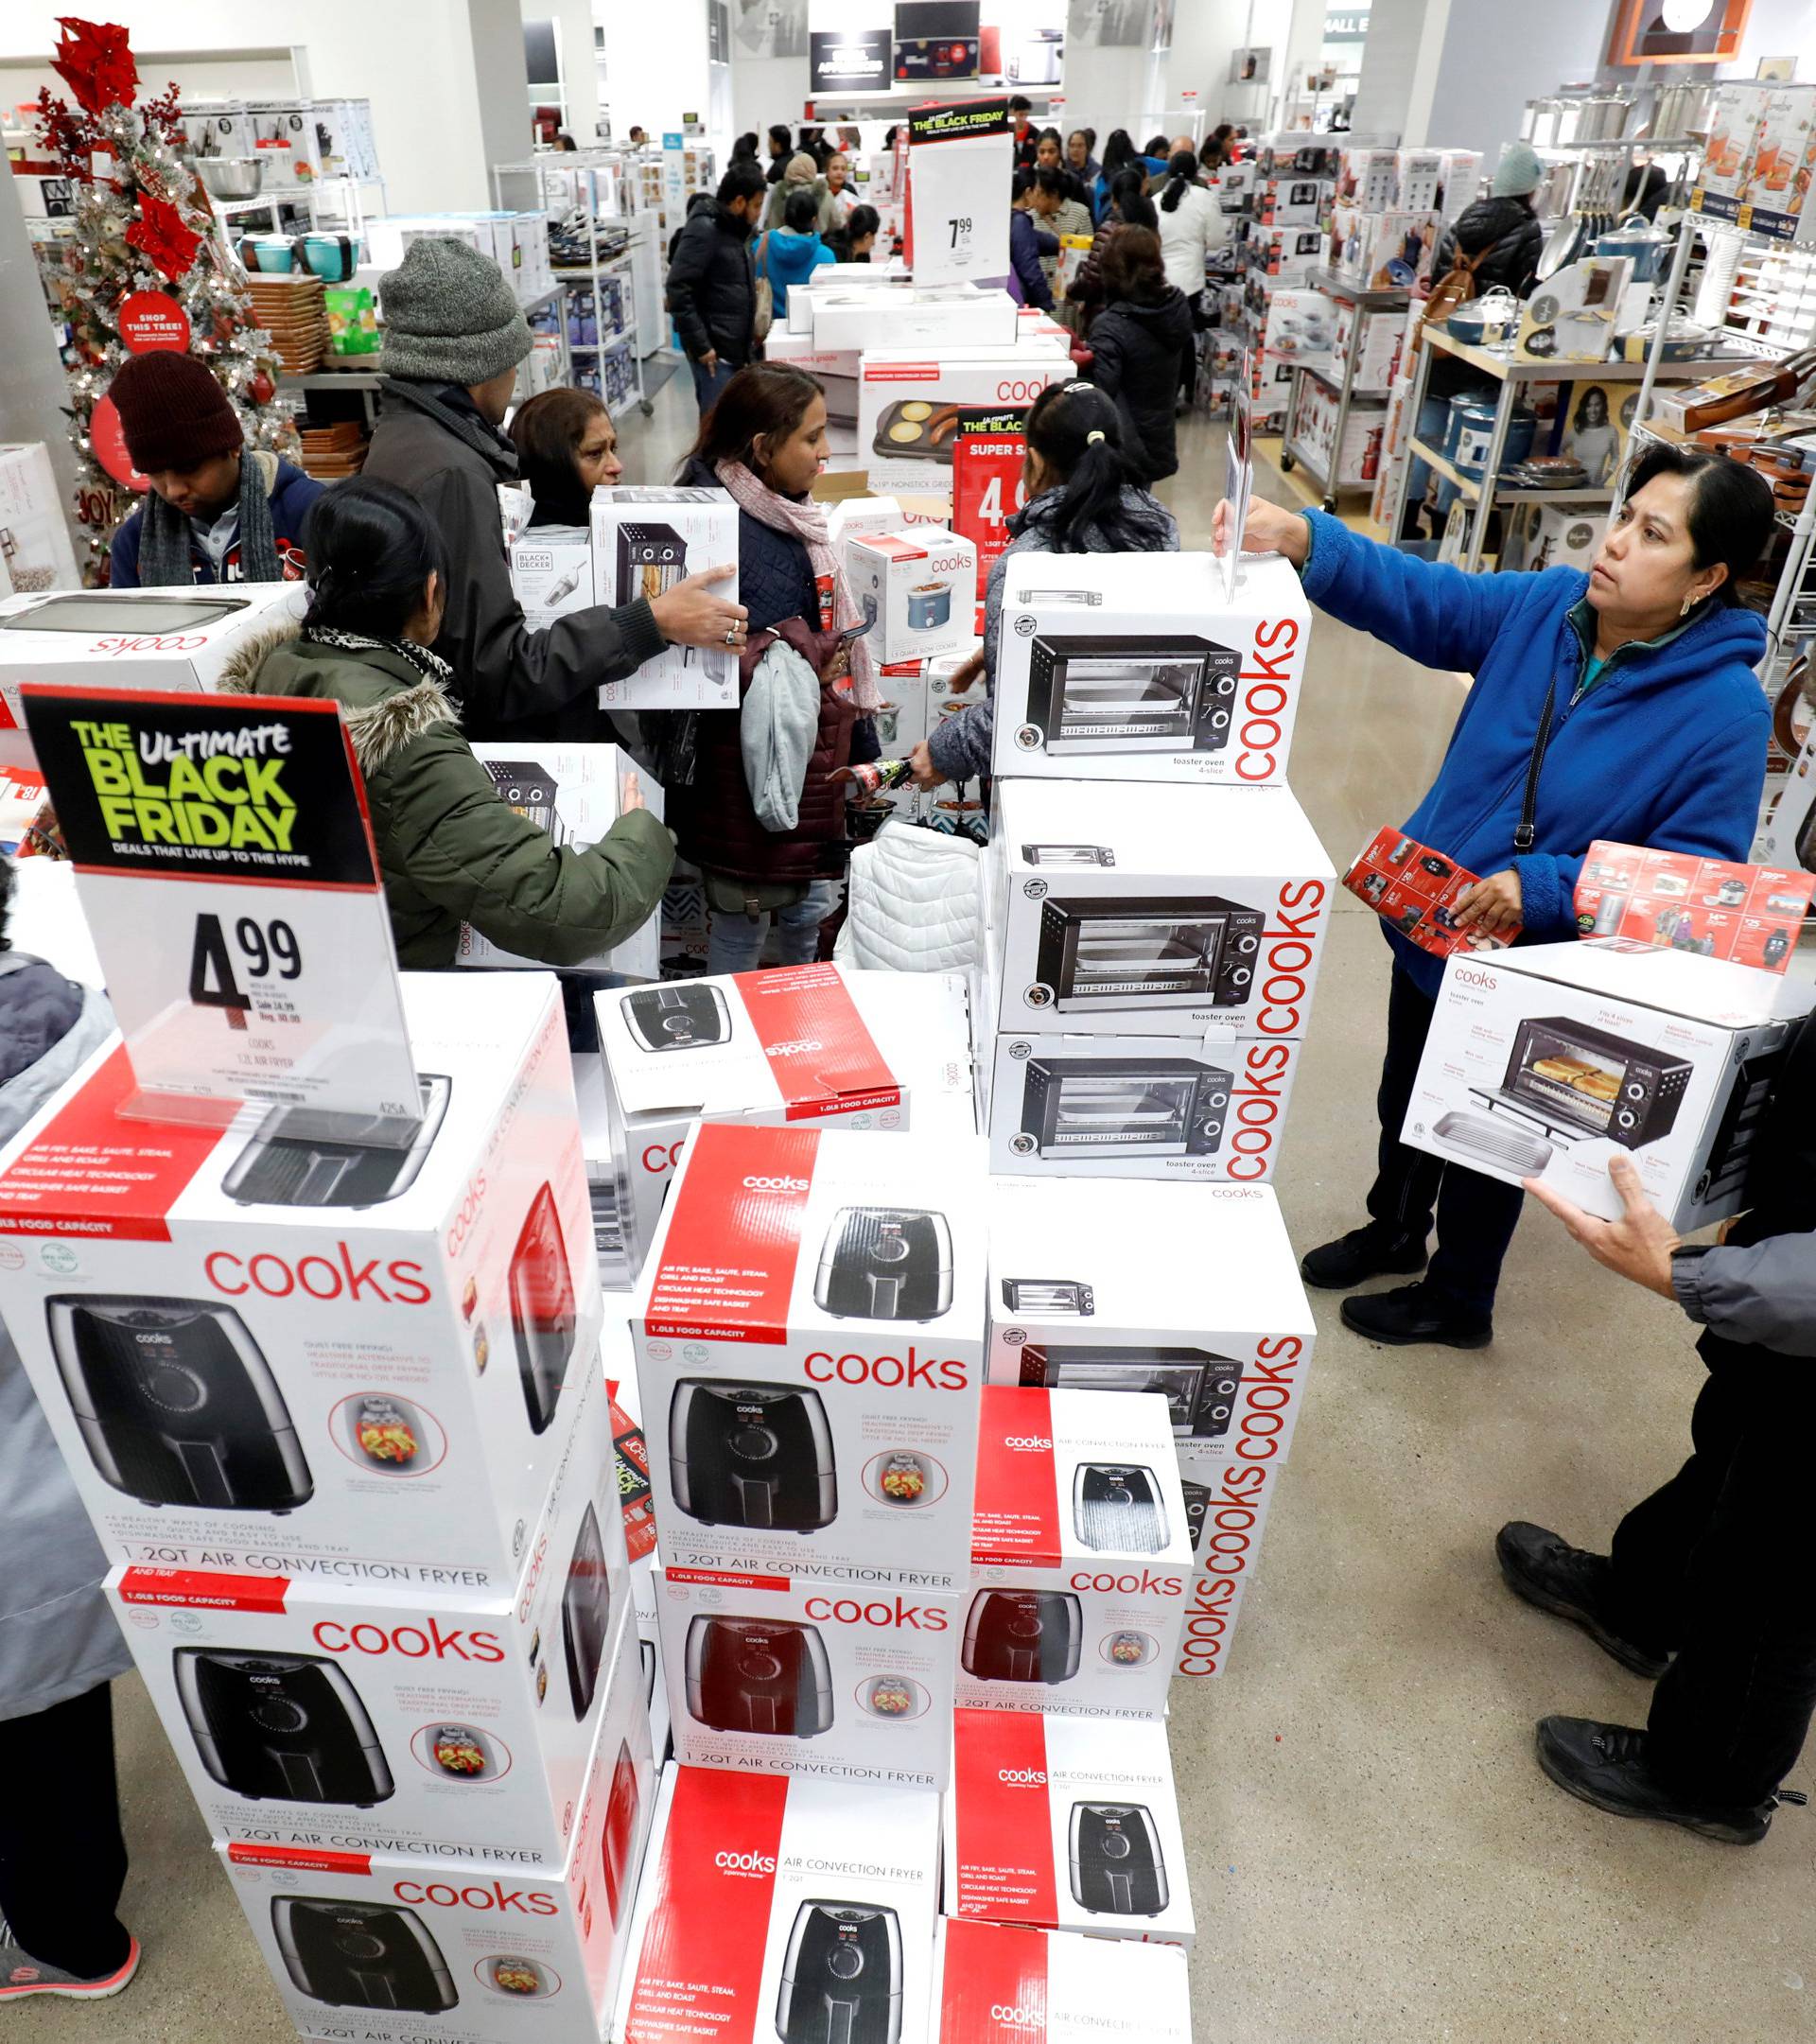 Customers shop for small appliances during the Black Friday sales event on Thanksgiving Day at JCPenney in Niles